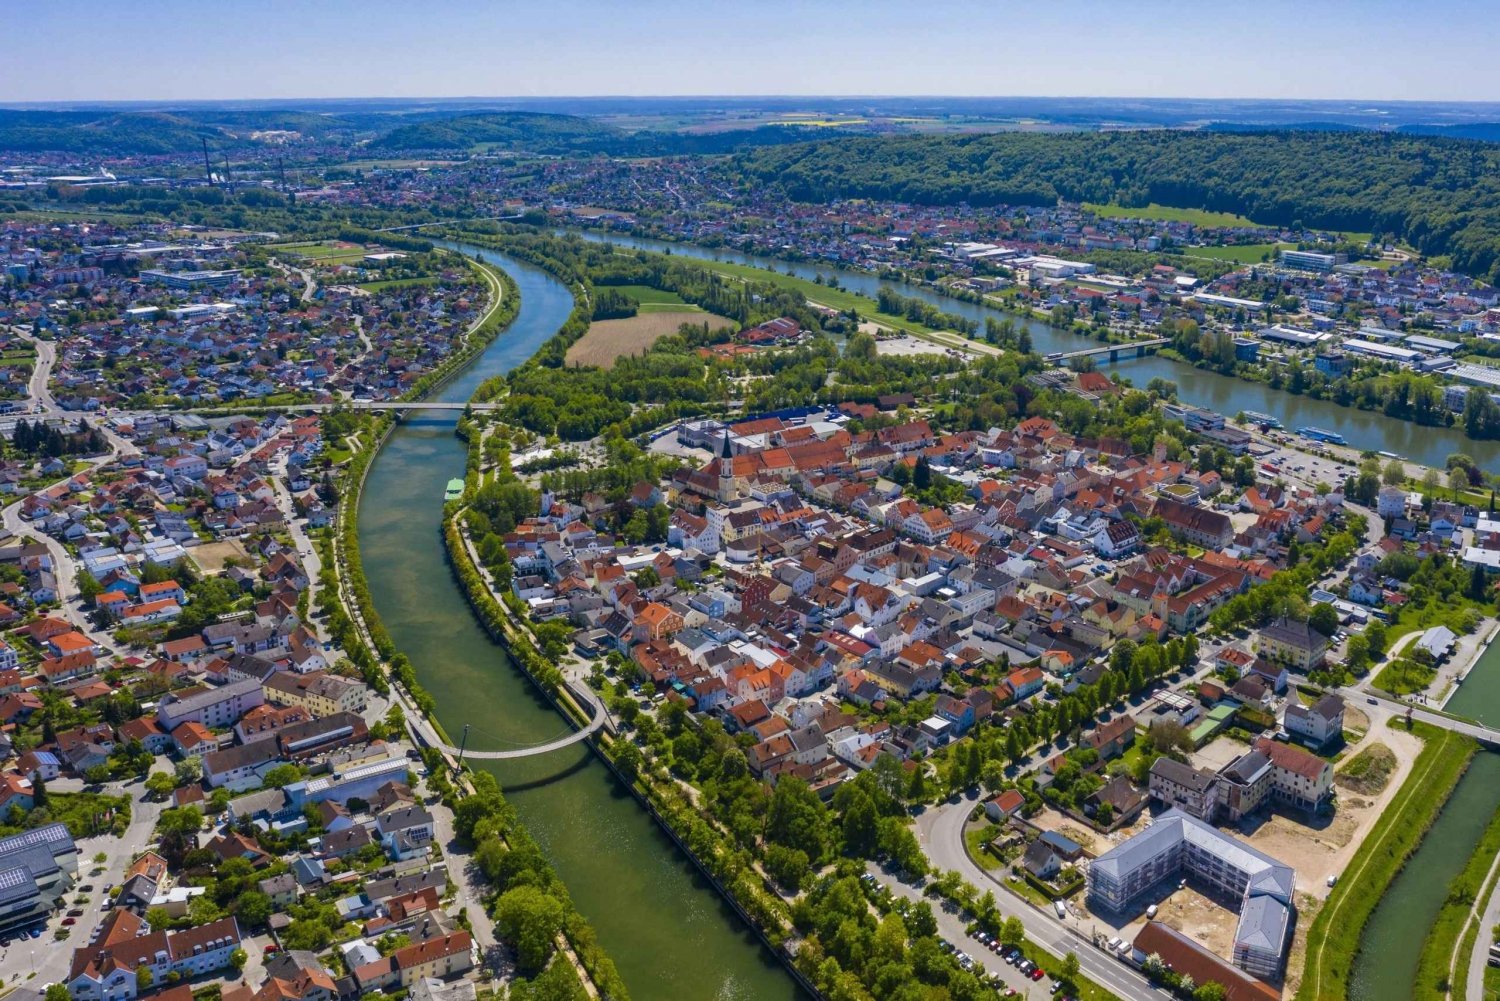 Munich: The most beautiful of the Danube and Altmühl